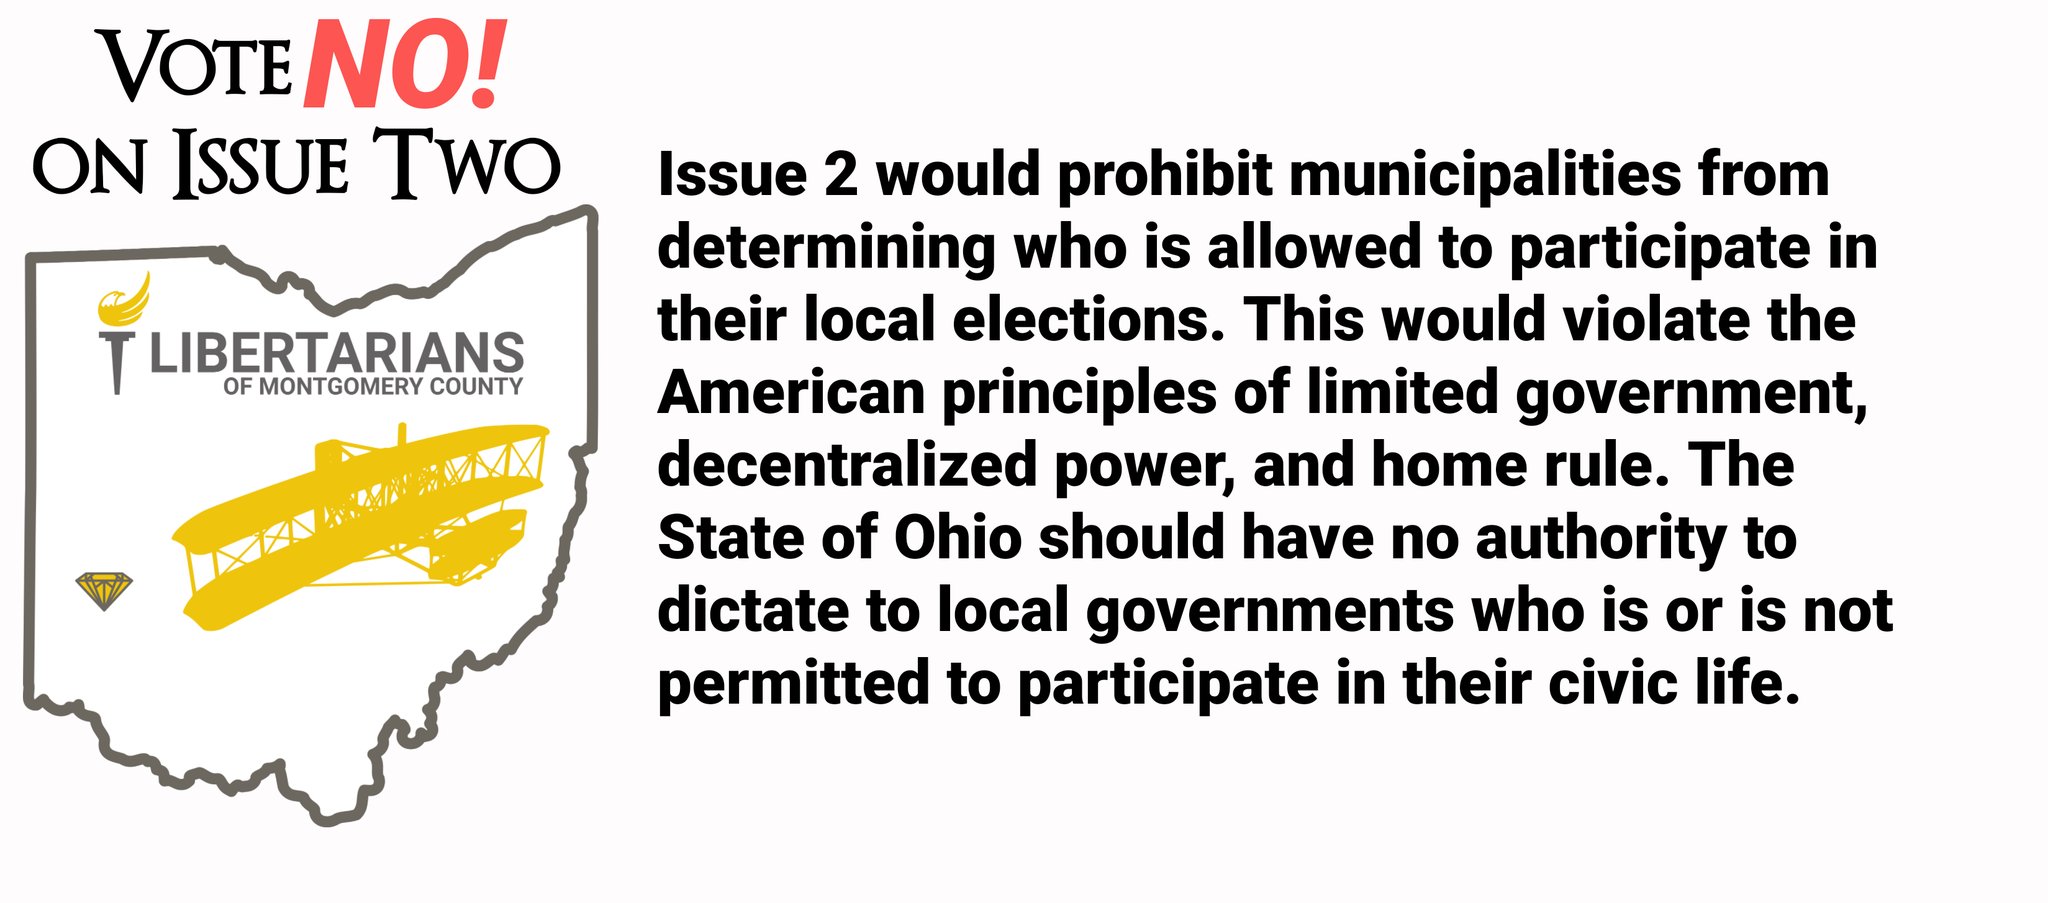 Issue 2 would prohibit municipalities from determining who is allowed to participate in their local elections. This would violate the American principles of limited government, decentralized power, and home rule. The State of Ohio should have no authority to dictate to local governments who is or is not permitted to participate in their civic life. We recommend voting No on Issue 2.